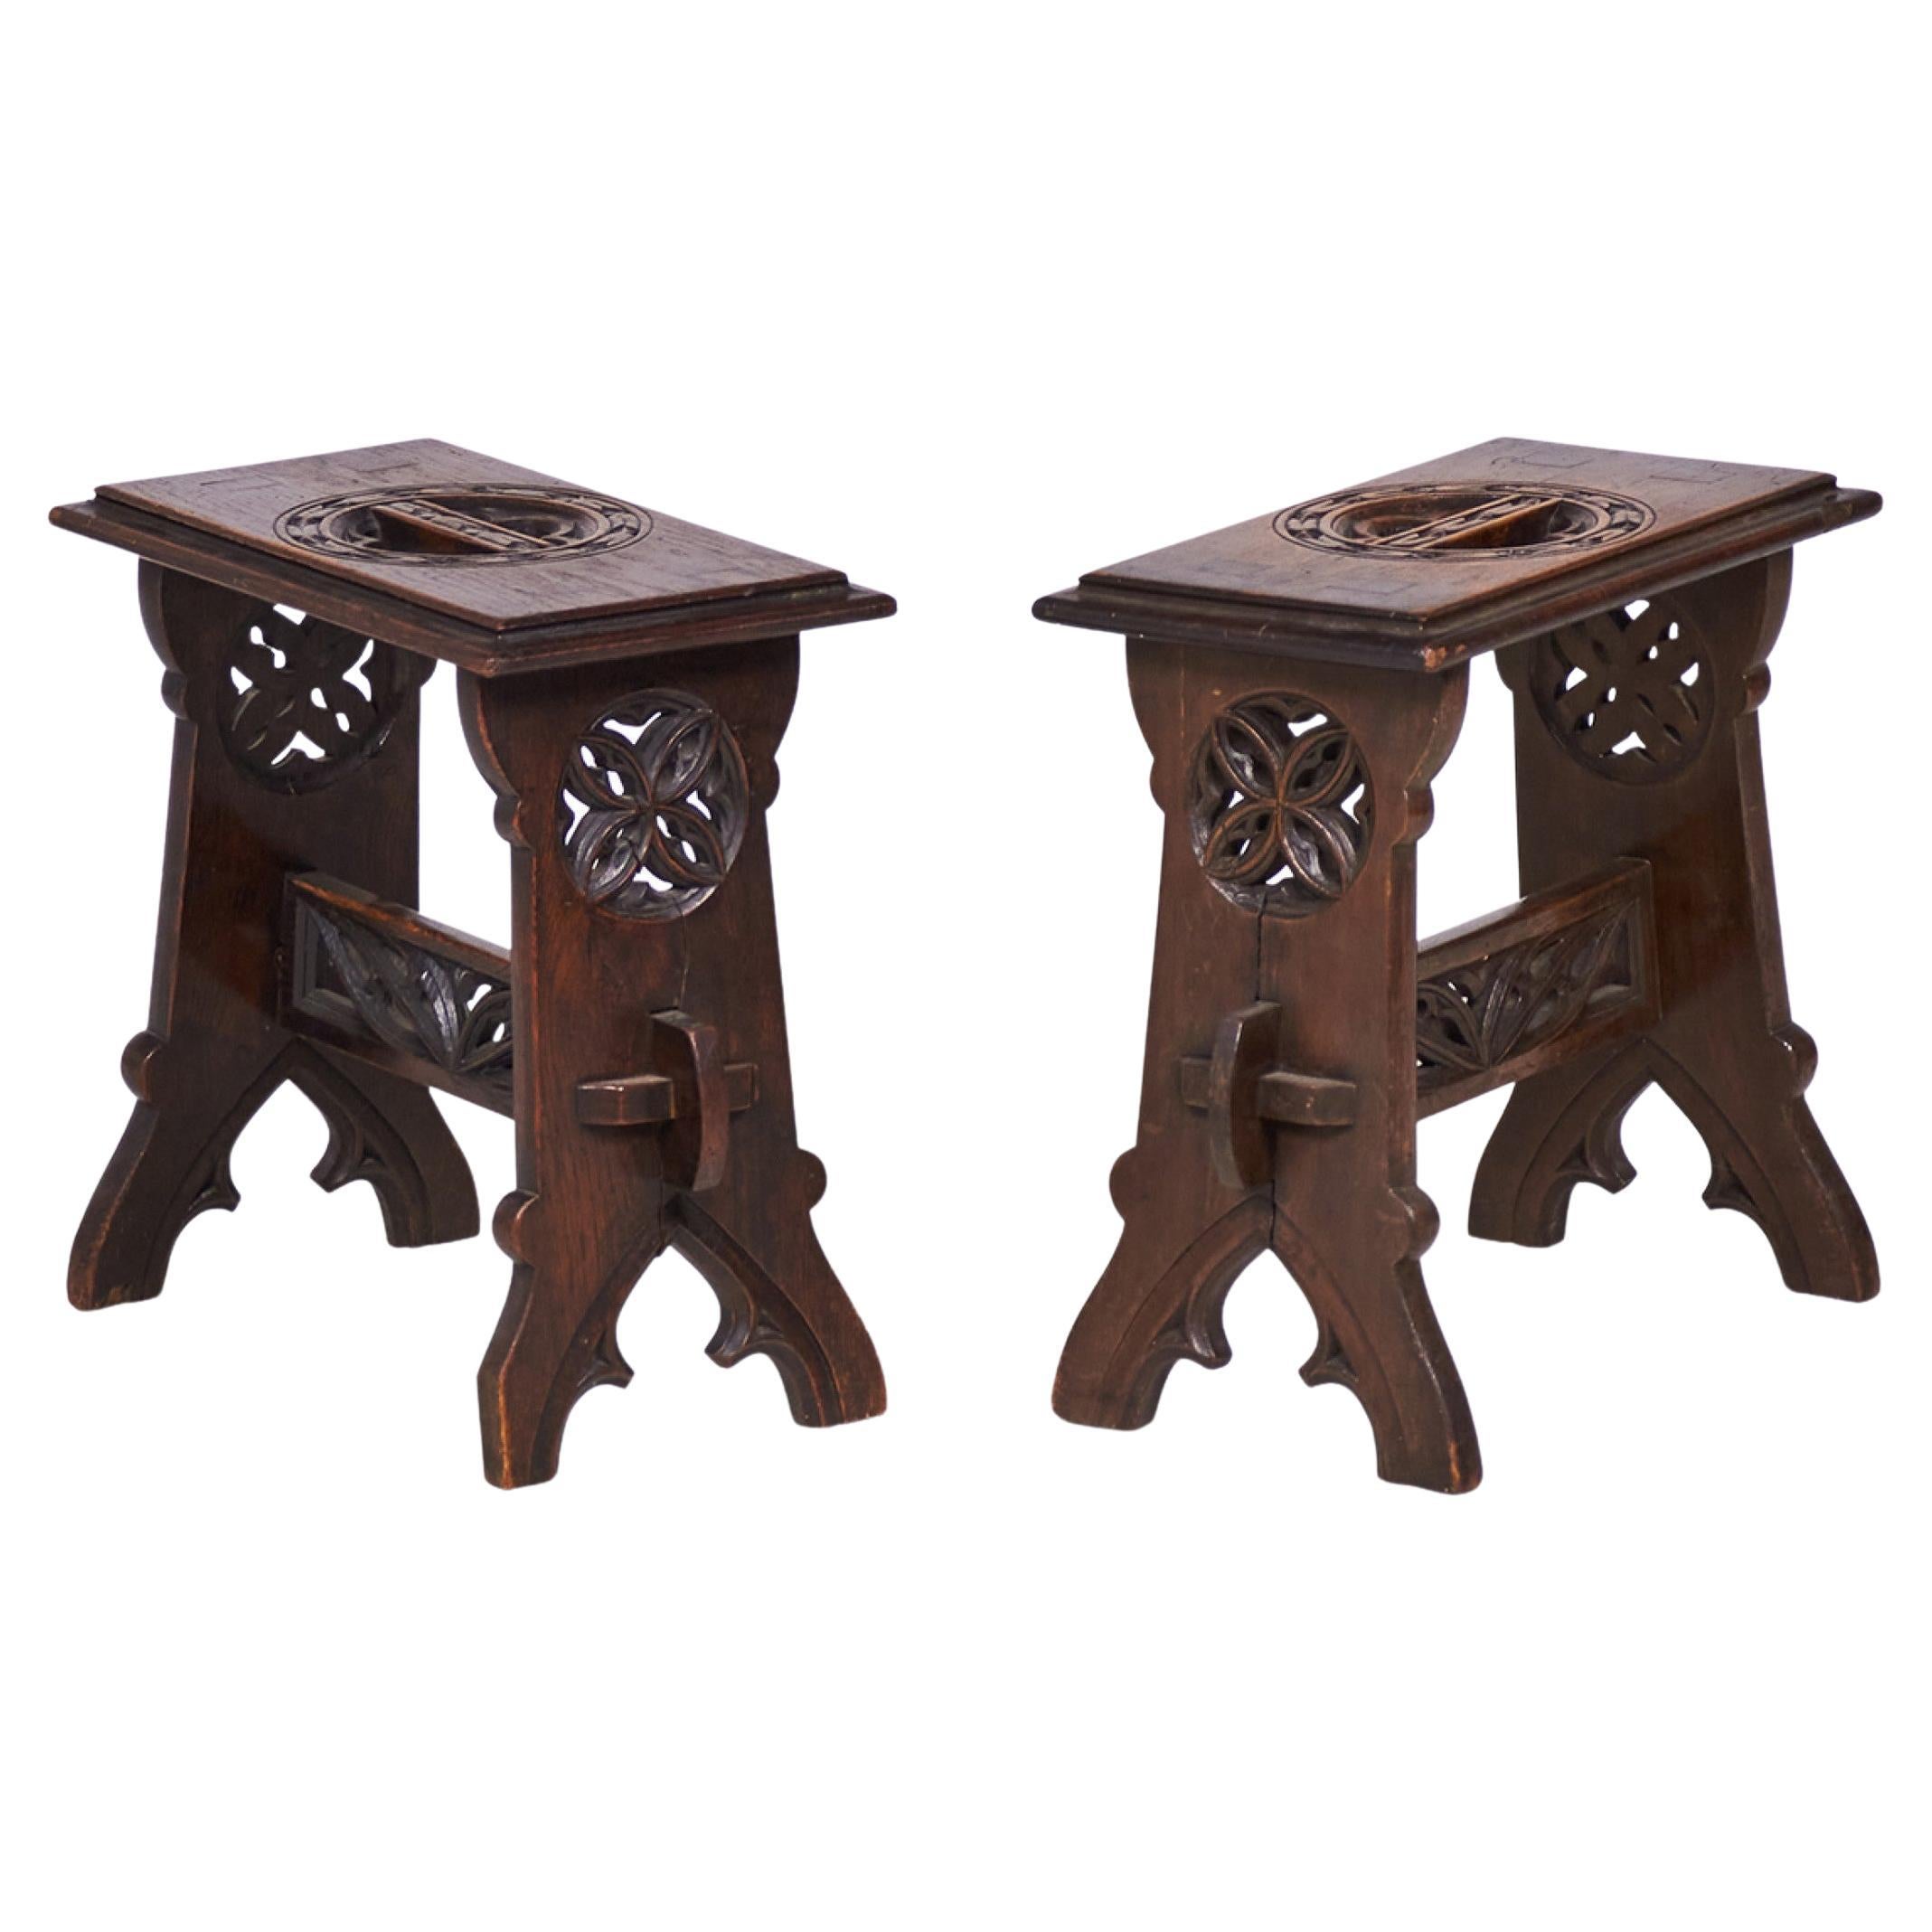 Pair of English Gothic Style Carved Rectangular Mahogany Benches